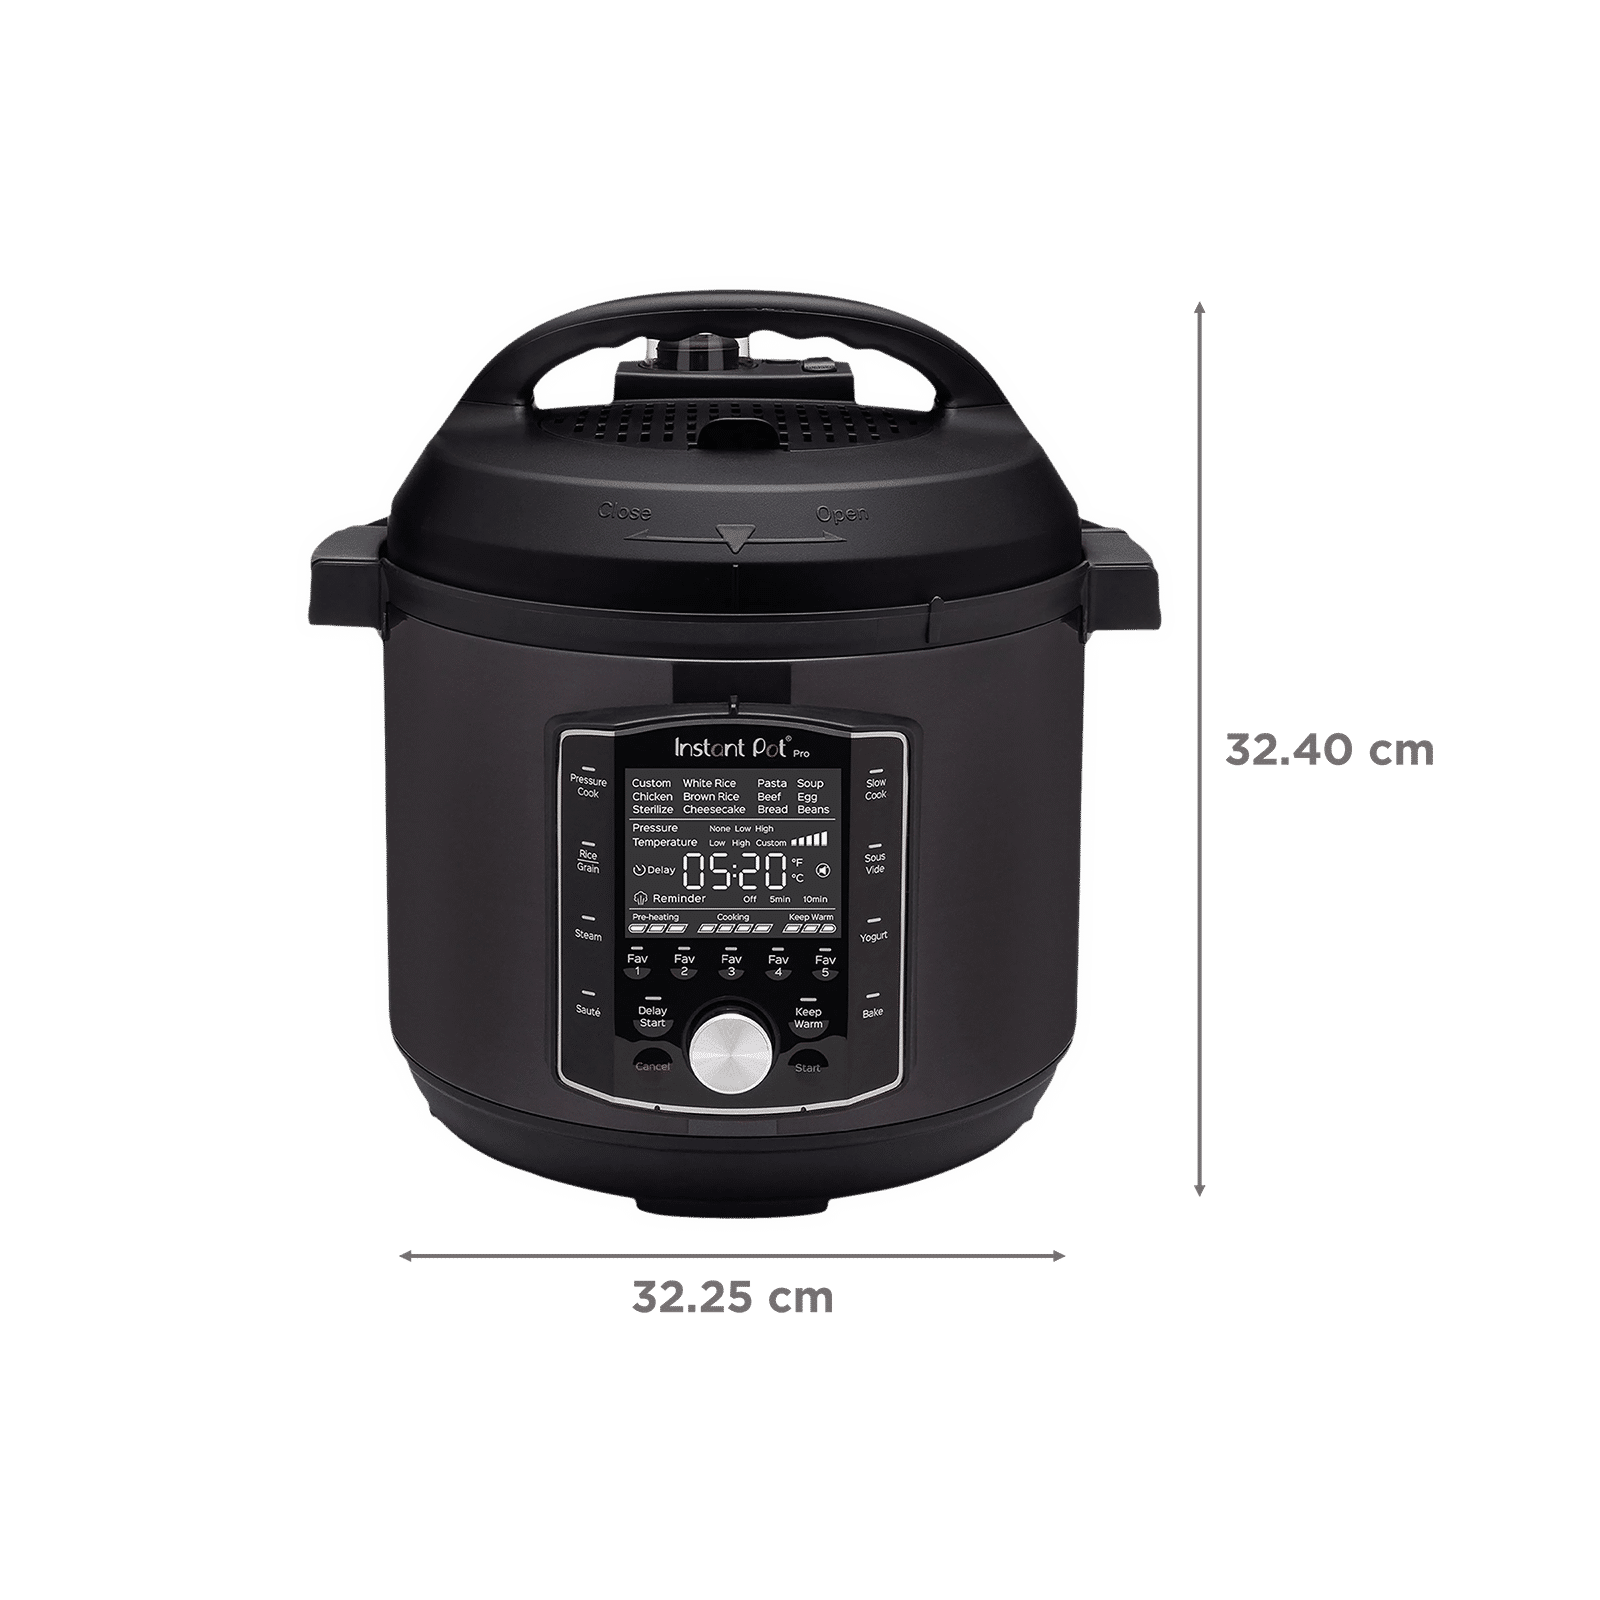 Buy Instant Pot Pro 5.35 Litre Electric Multi Pot Cooker with Keep Warm ...